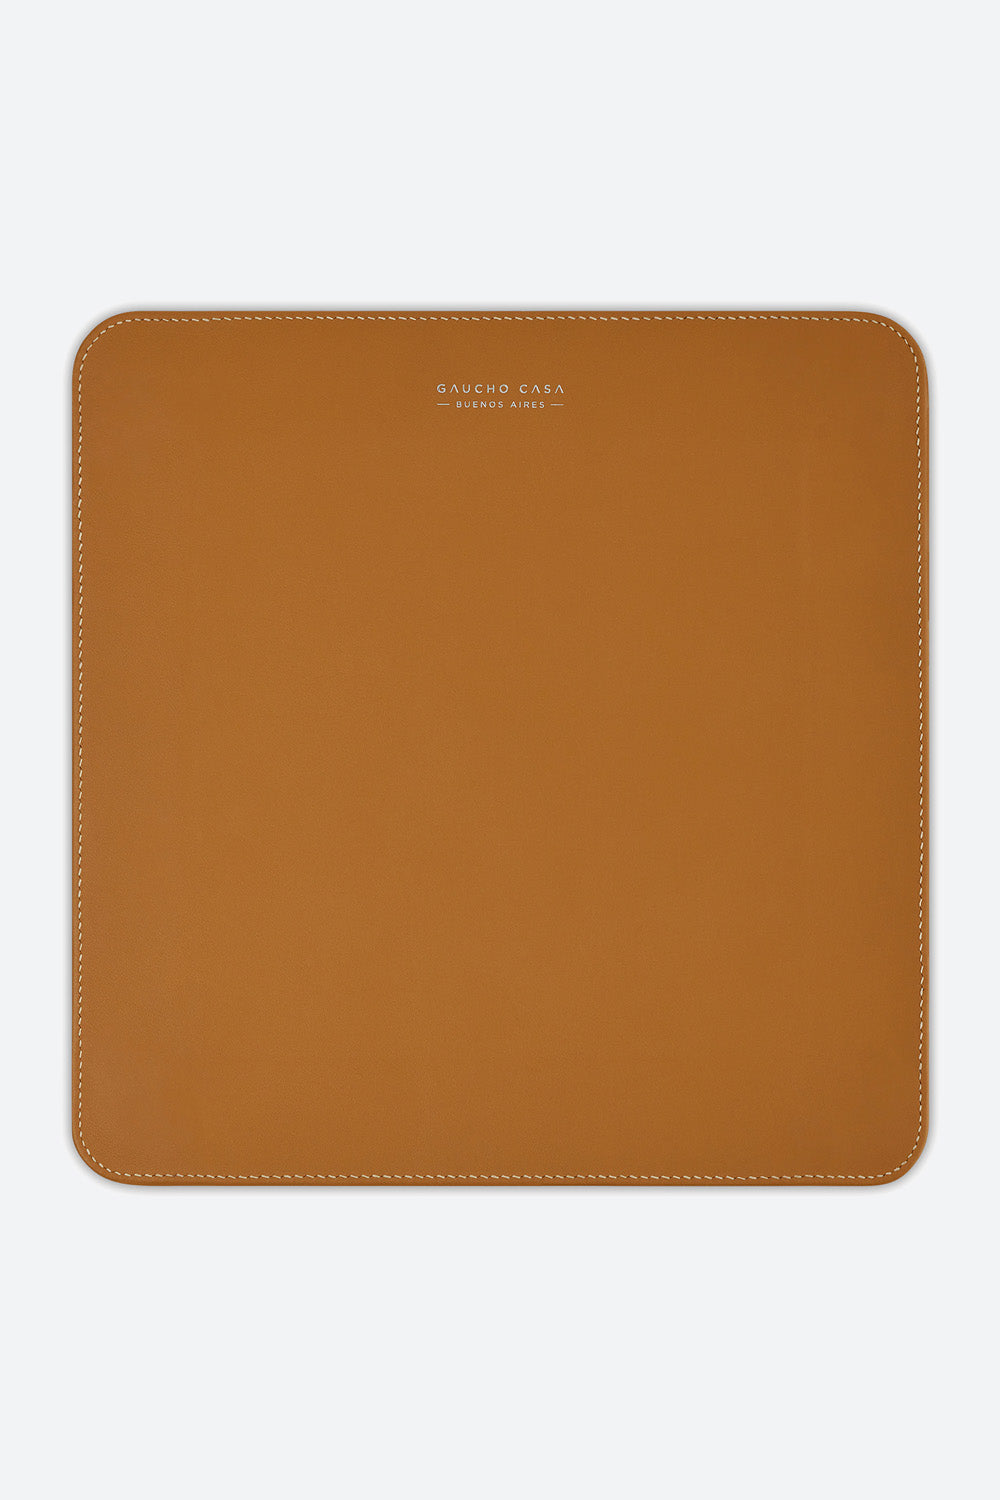 Large Square Leather Valet Tray in Apricot